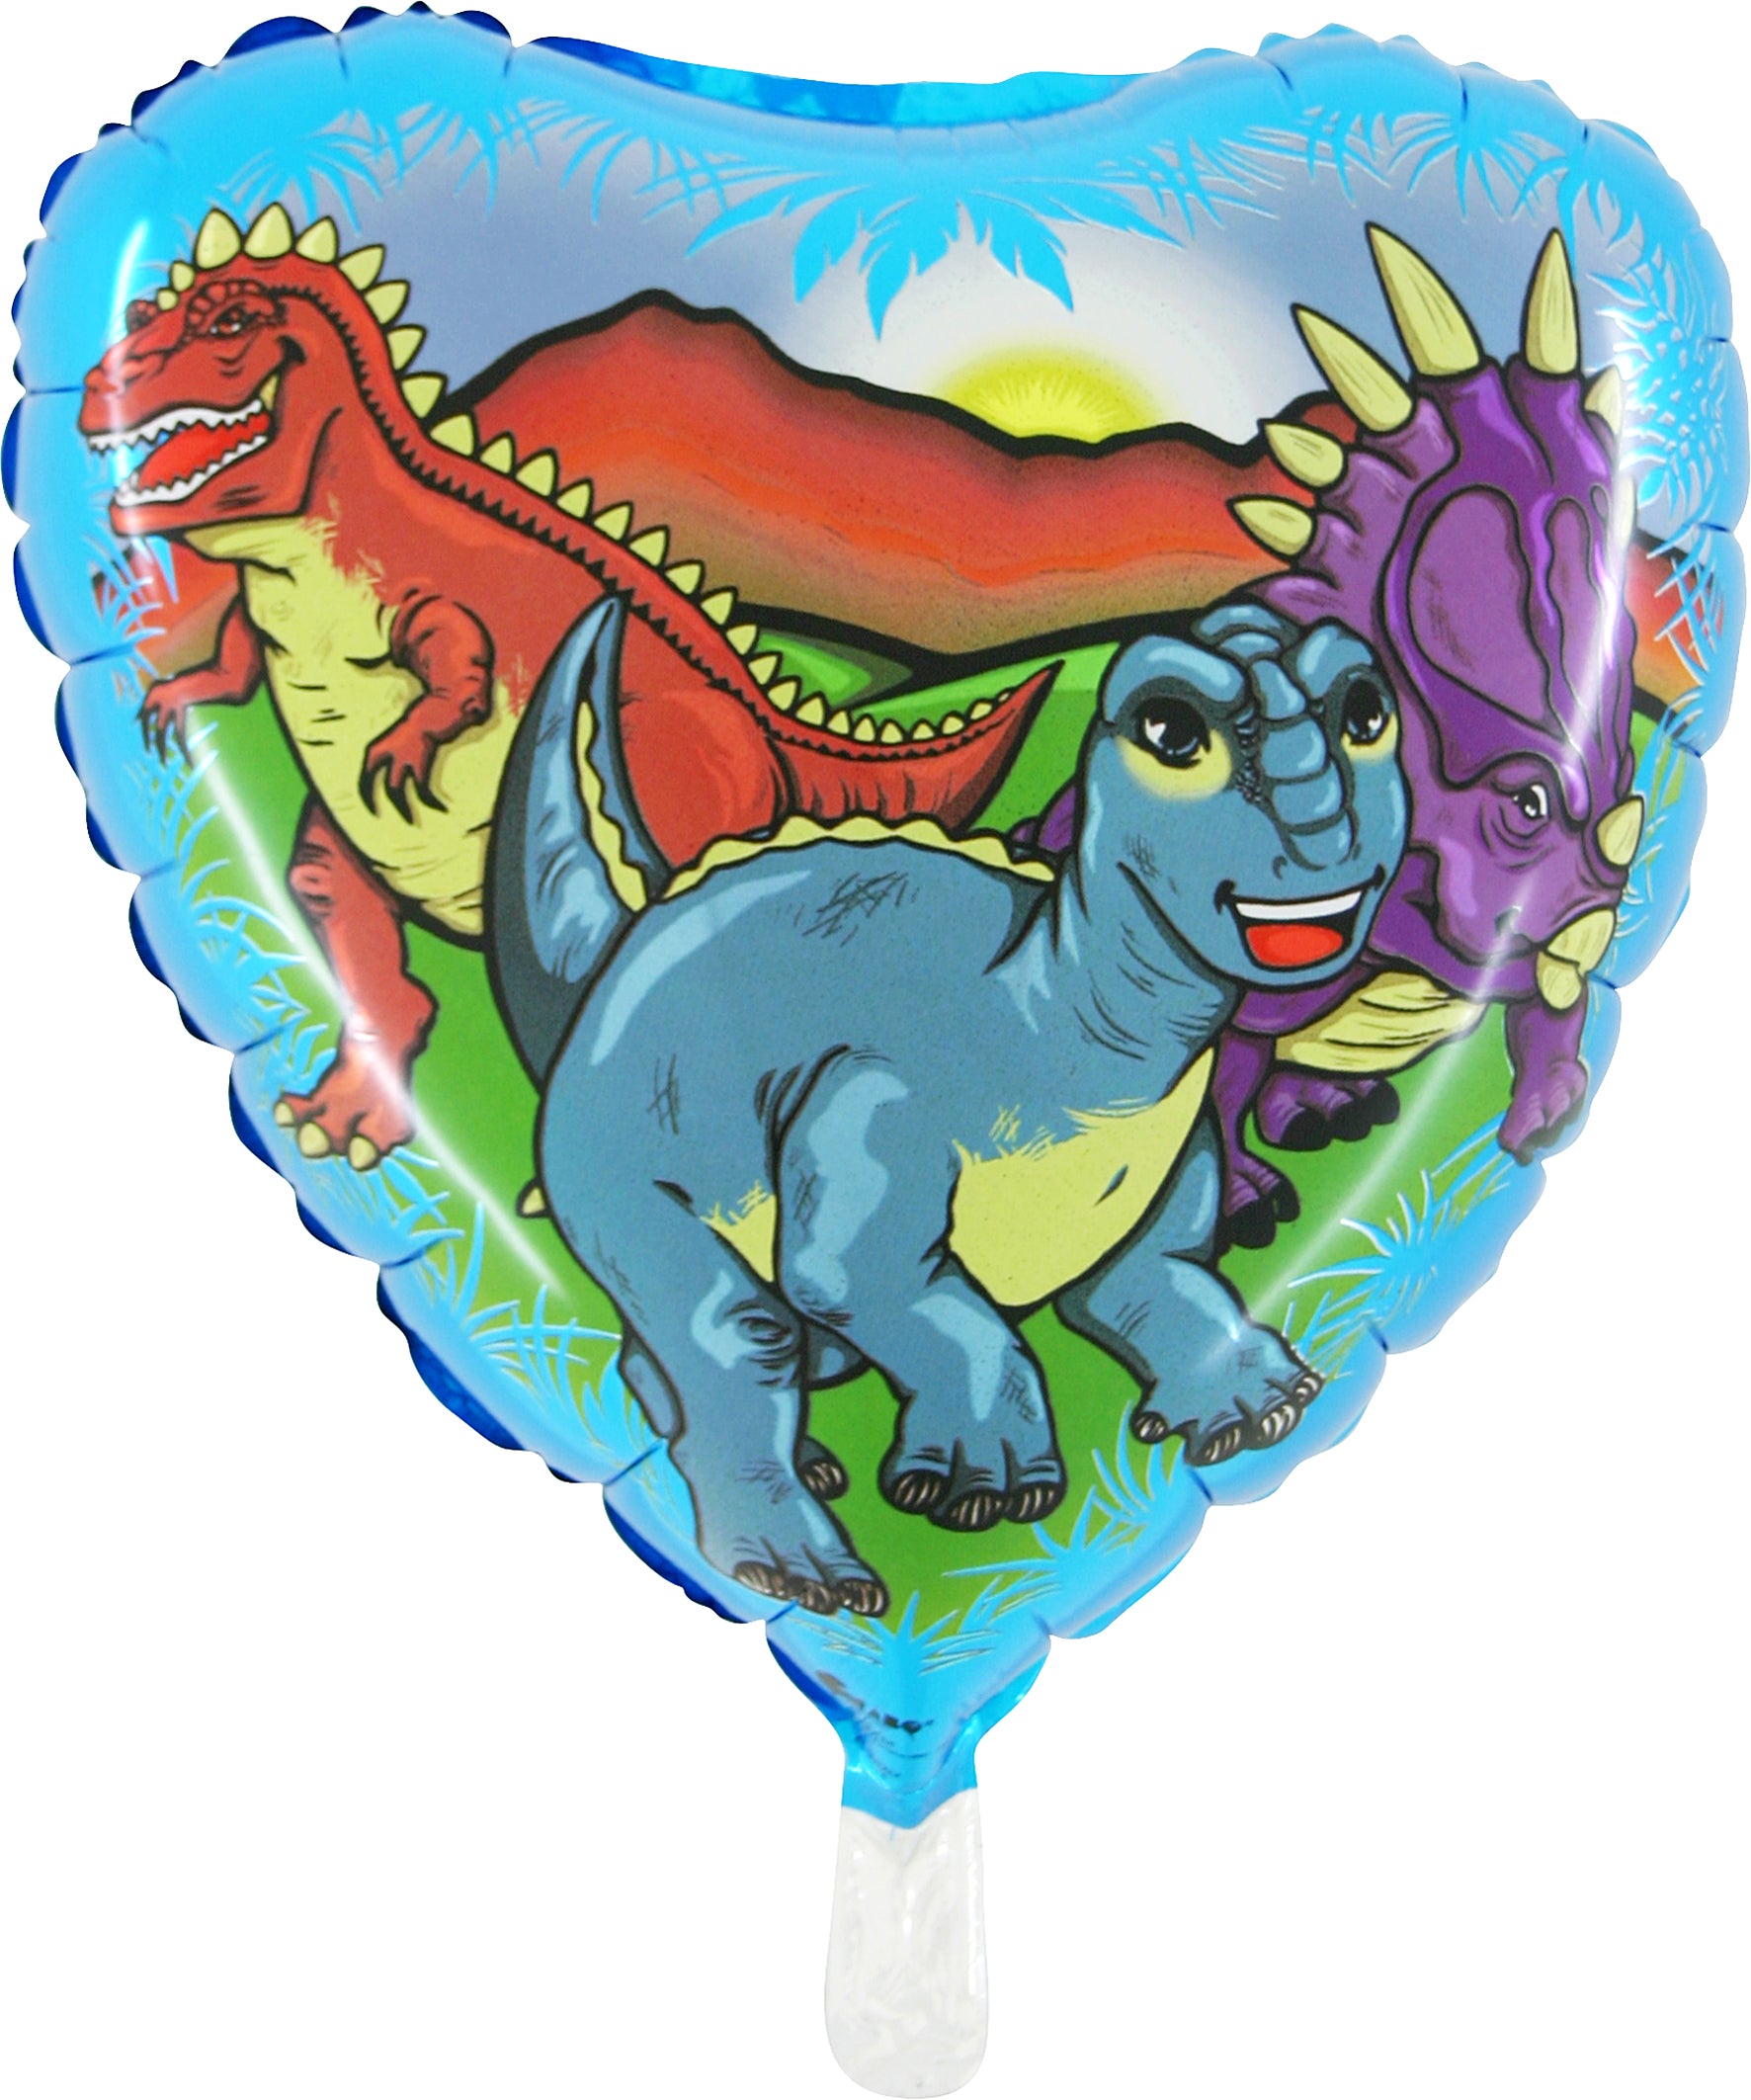 colorful heart shaped balloon with dinosaurs